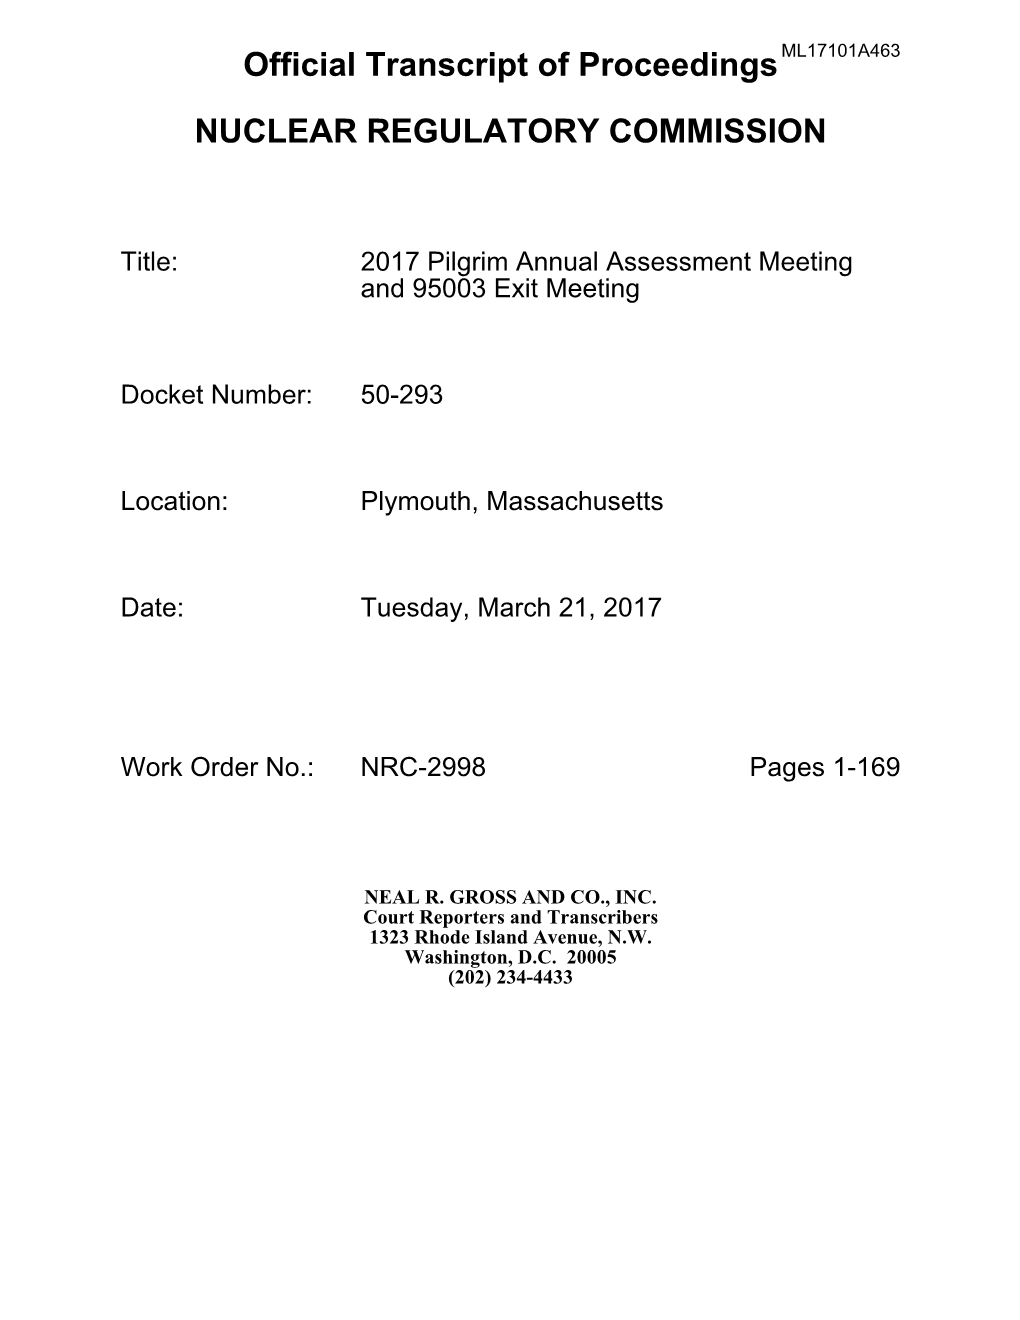 03/21/2017 Transcript of Annual Assessment/95003 Inspection Exit